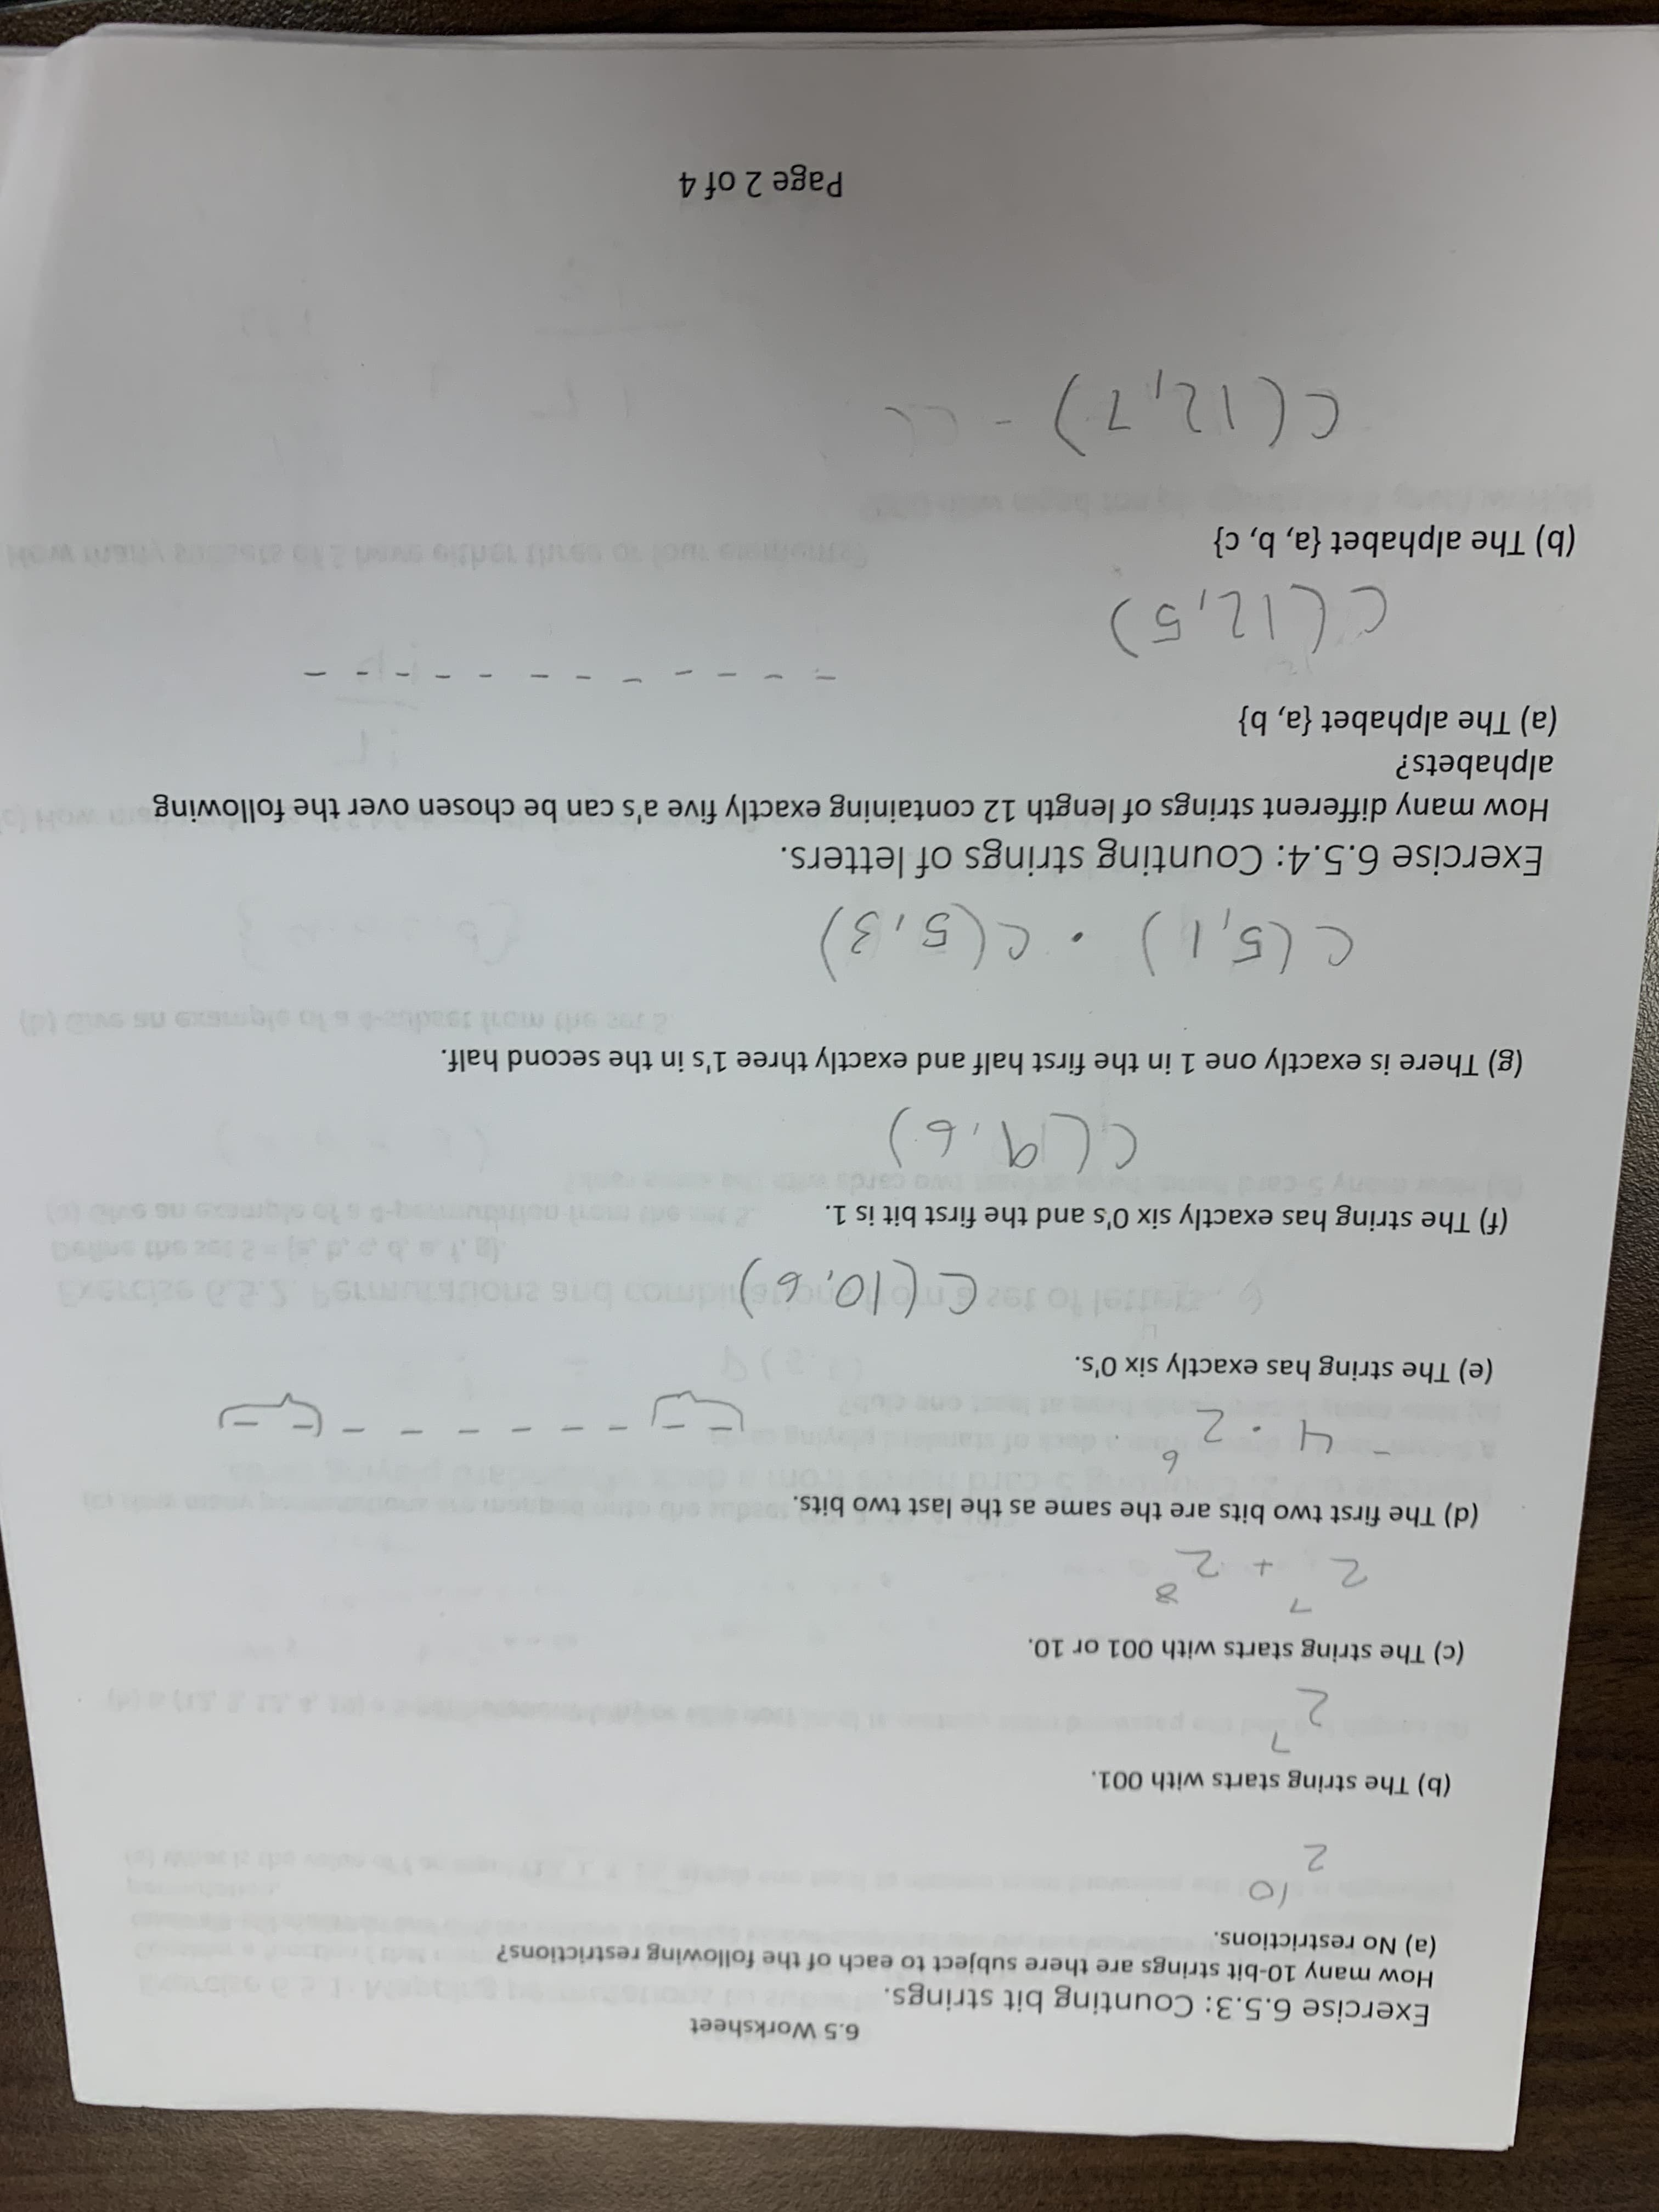 6.5 Worksheet
Exercise 6.5.3: Counting bit strings.
How many 10-bit strings are there subject to each of the following restrictions?
(a) No restrictions.
2.
(b) The string starts with 001.
(c) The string starts with 001 or 10.
(d) The first two bits are the same as the last two bits.
6.
(e) The string has exactly six O's.
to ta Cl0, 6)dmon bne eousums 2a salbaxa
(f) The string has exactly six O's and the first bit is 1.
(g) There is exactly one 1 in the first half and exactly three 1's in the second half.
(5,3)
Exercise 6.5.4: Counting strings of letters.
woh
How many different strings of length 12 containing exactly five a's can be chosen over the following
alphabets?
(a) The alphabet {a, b}
ך1 (1'ב
(b) The alphabet {a, b, c}
(Lכ(ו
Page 2 of 4
